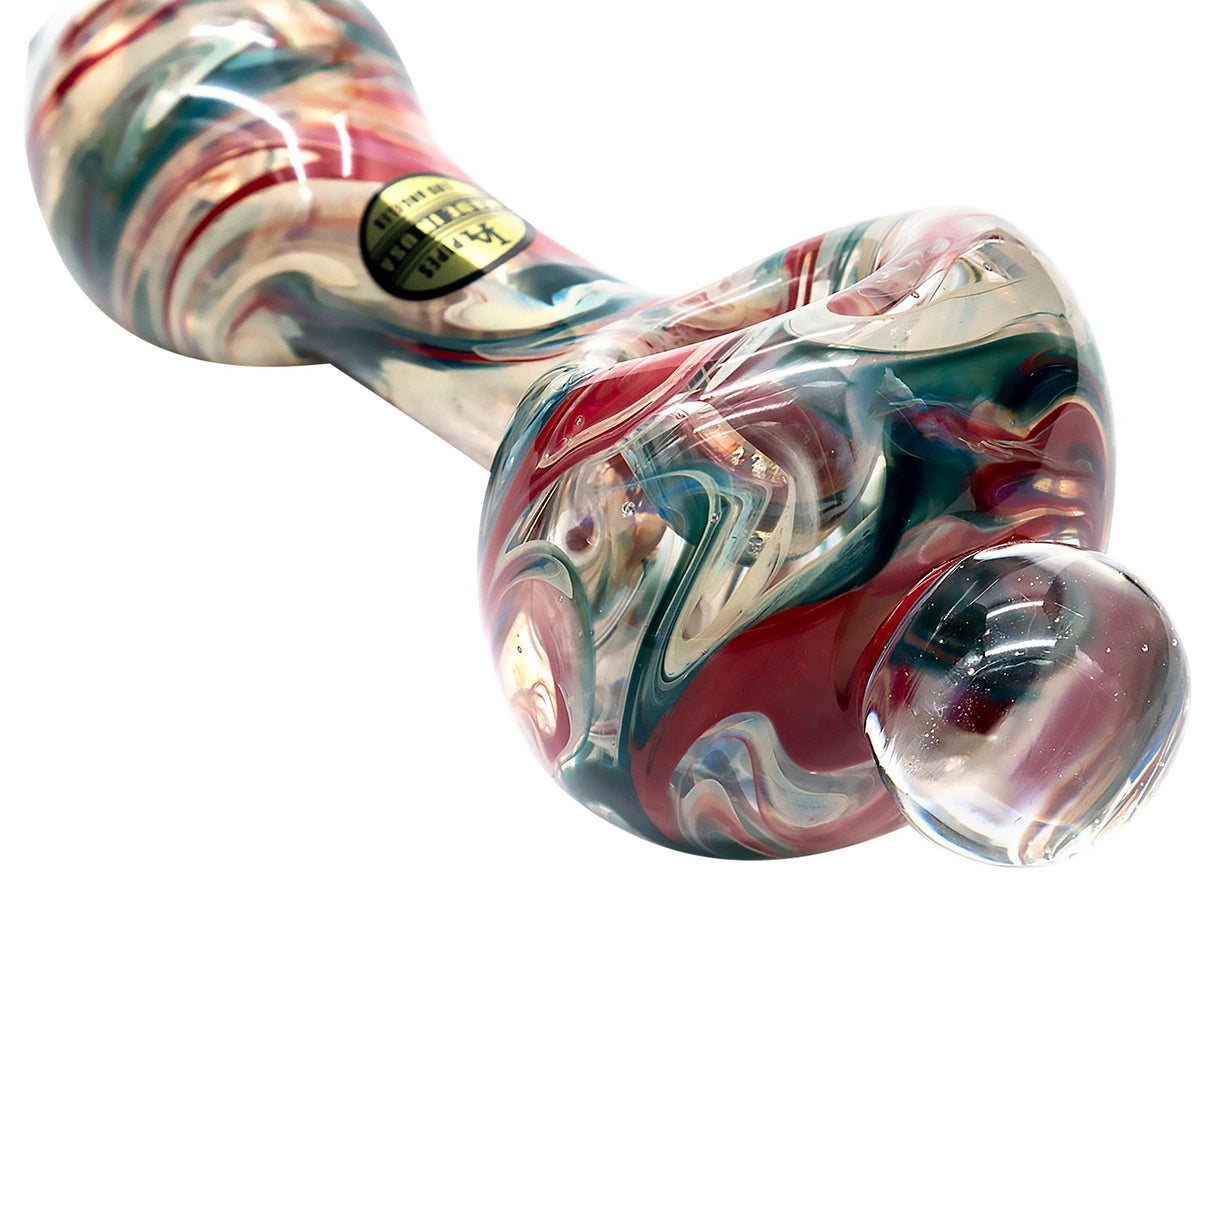 LA Pipes "Primordial Ooze" Glass Spoon Pipe with Fumed Color Changing Design, 4.5" Length